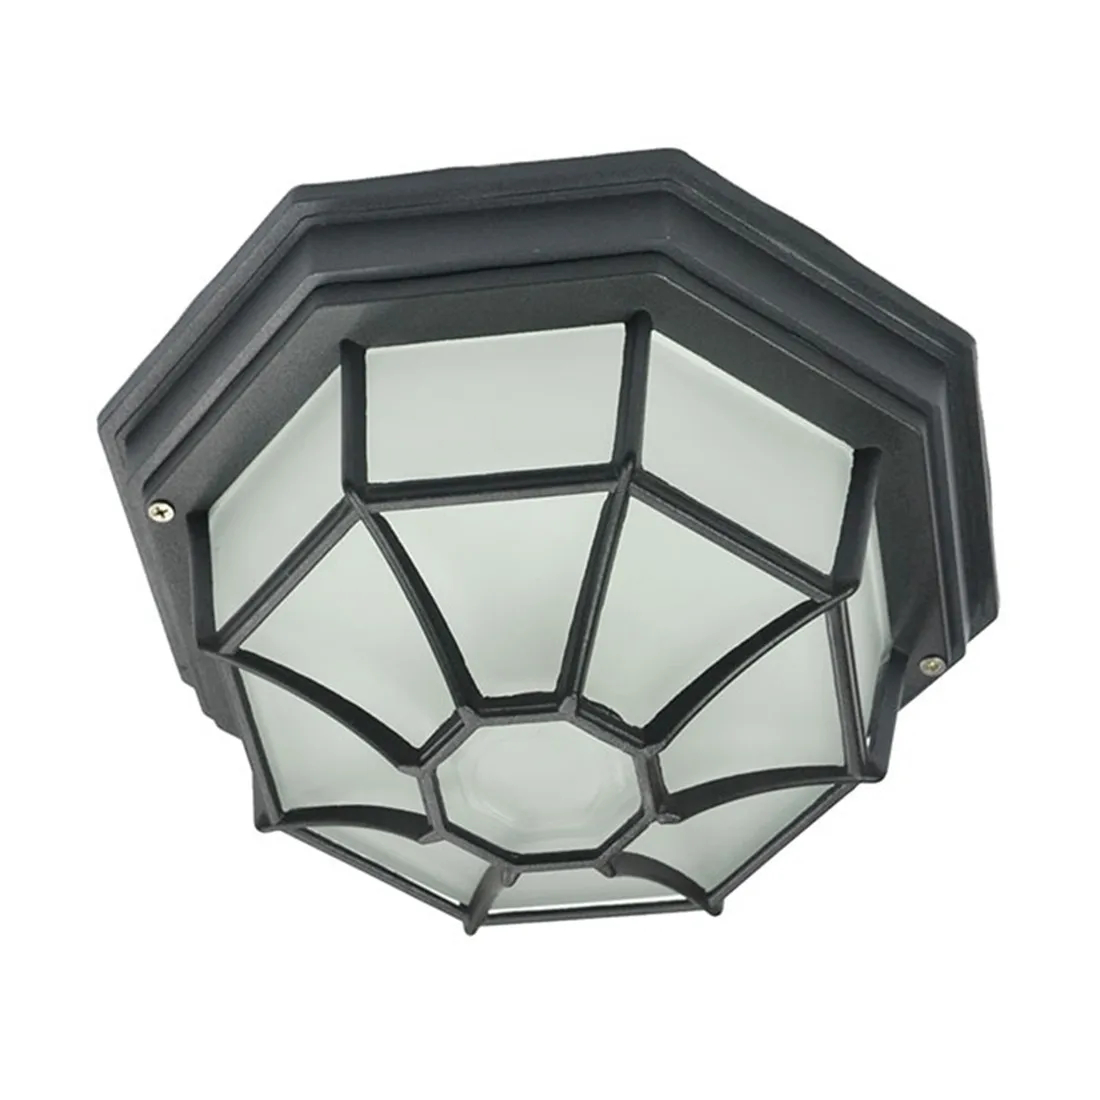 Antique Black Bronze Outdoor Ceiling Light E27 Flush Mount Lamp for Outdoor Pathway Walkway Balcony Lighting 24w smart led ceiling light tuya wifi app double layer dimmable cct ultrathin surface mount ceiling wall lamp rgb backlights